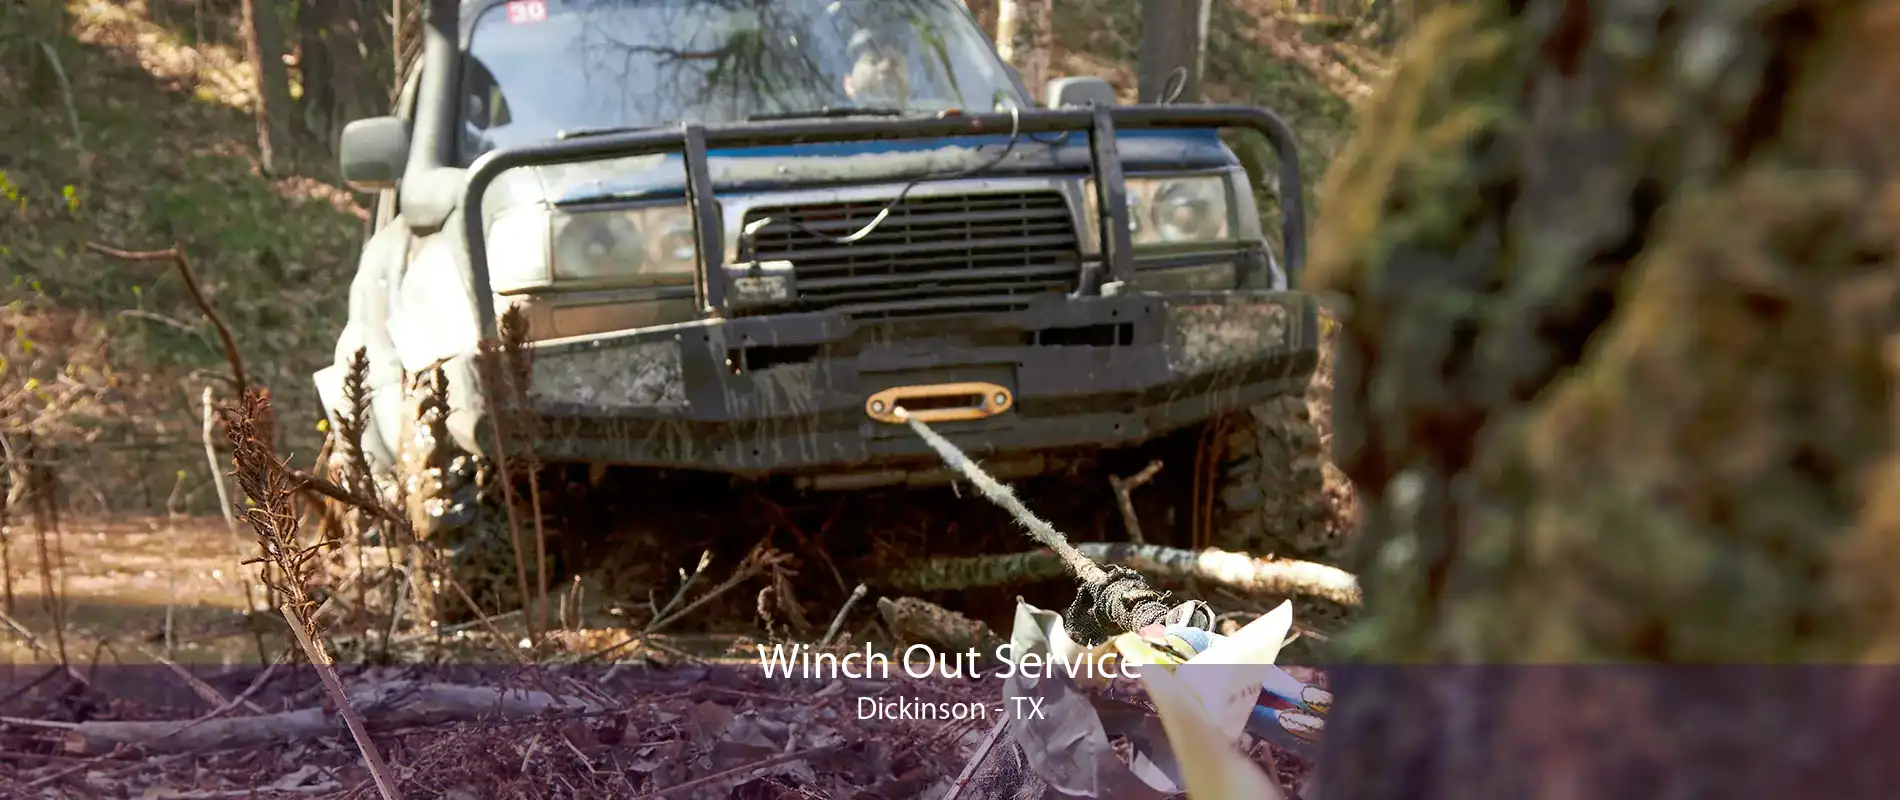 Winch Out Service Dickinson - TX